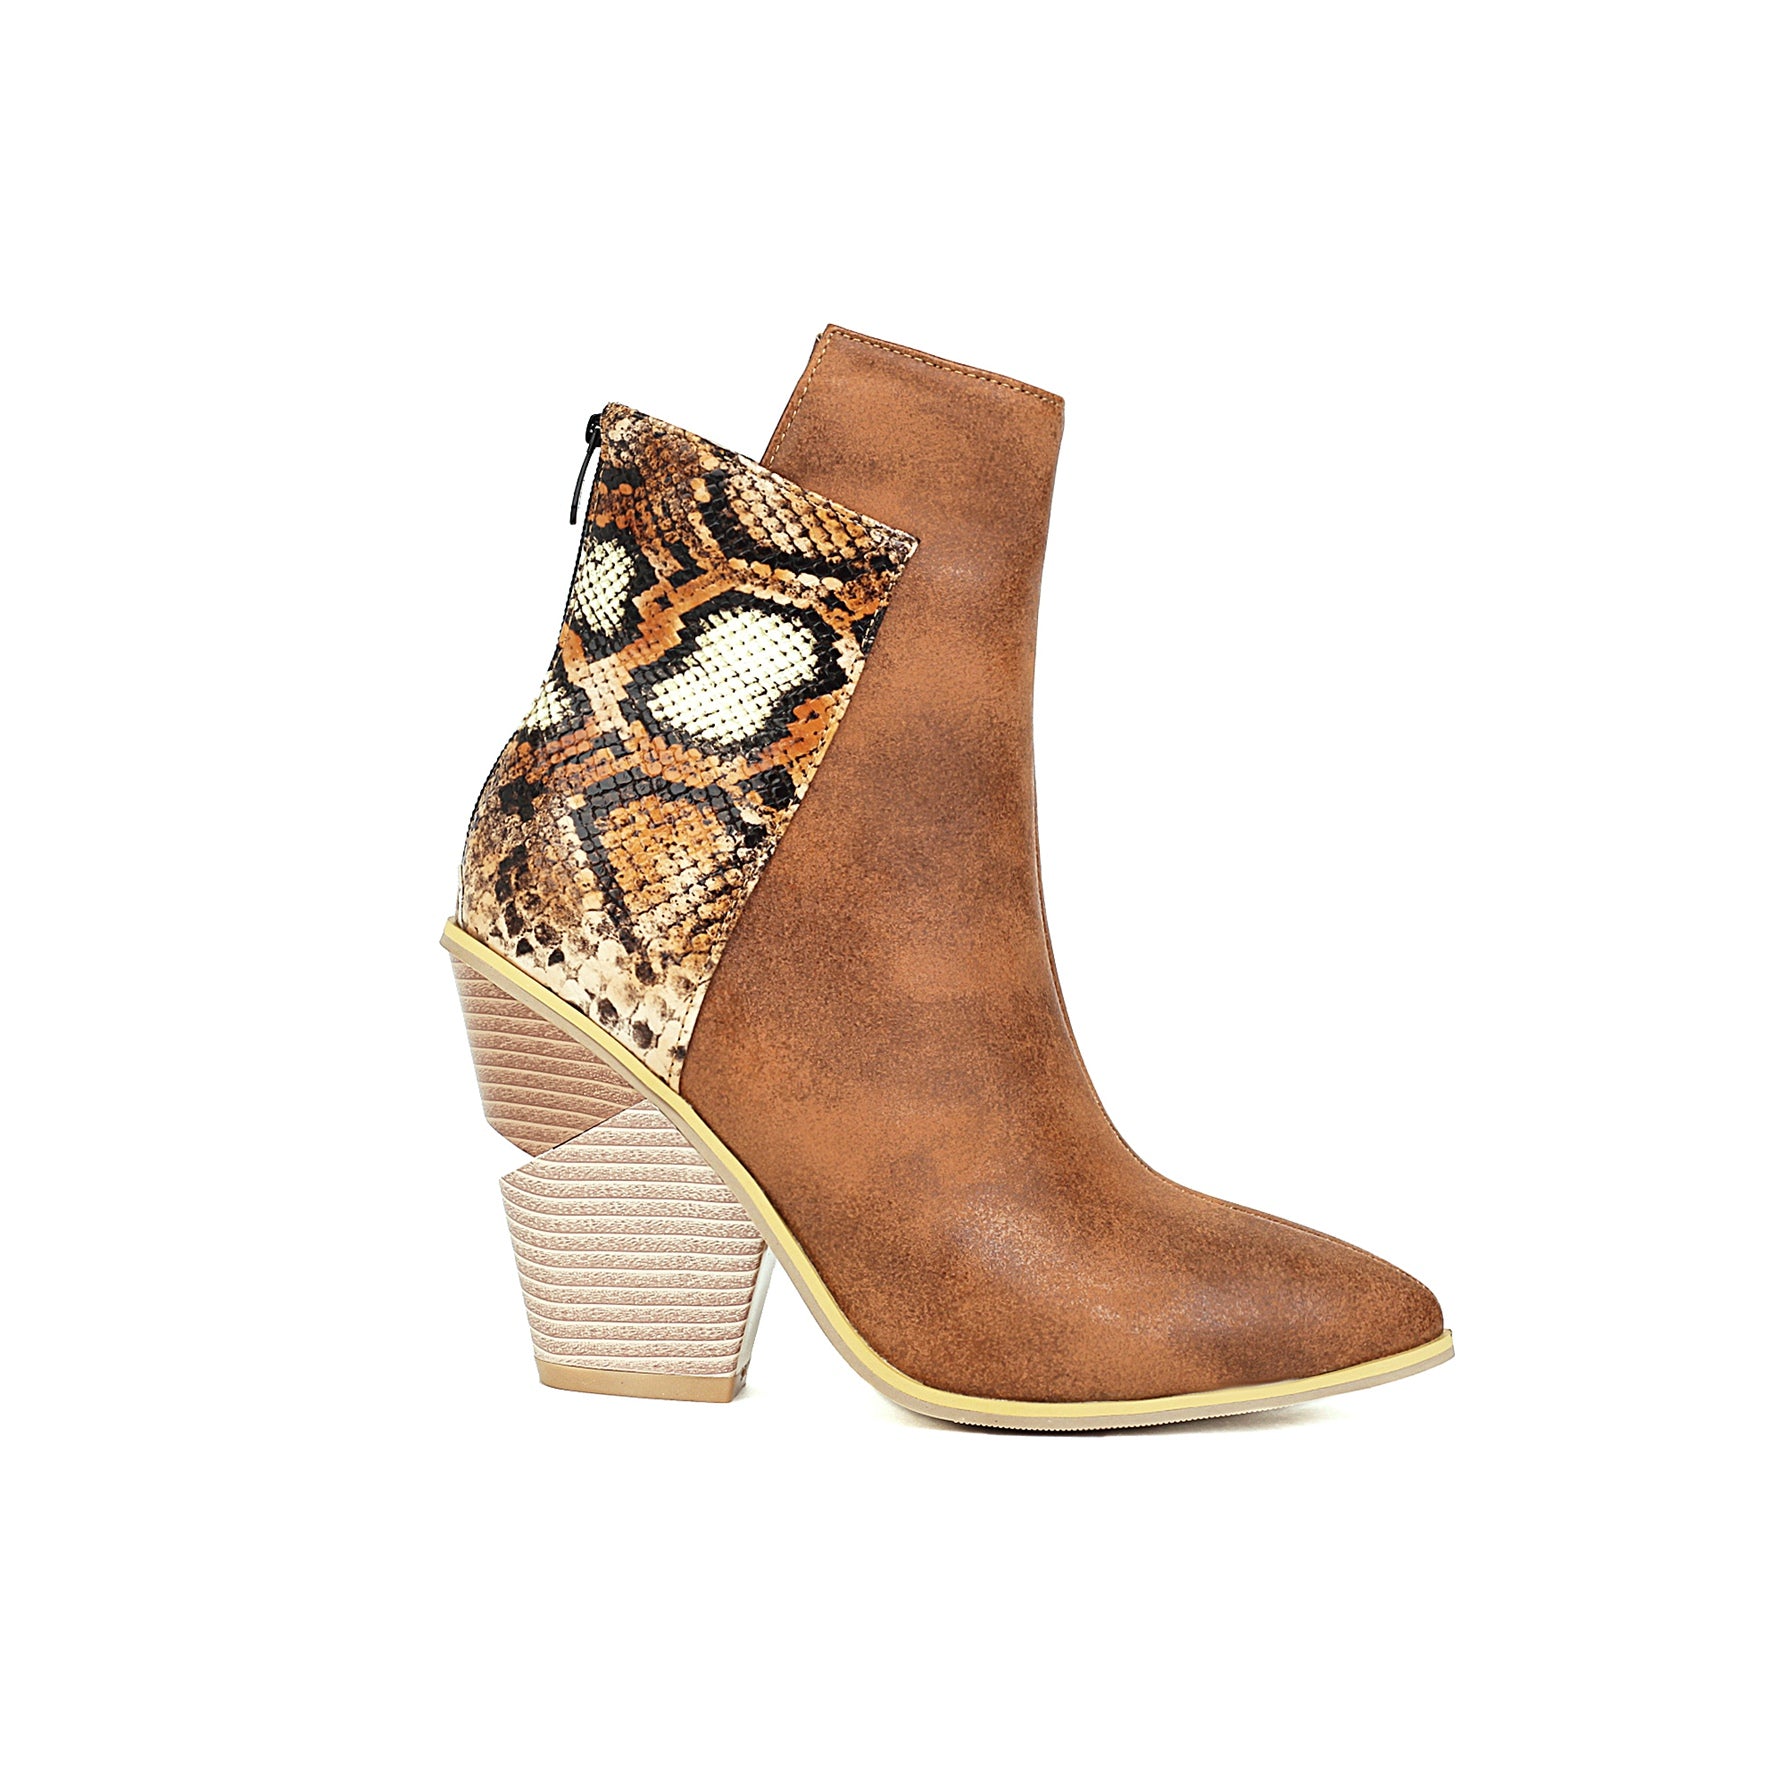 Bigsizeheels Pointed snakeskin print boots - Brown freeshipping - bigsizeheel®-size5-size15 -All Plus Sizes Available!